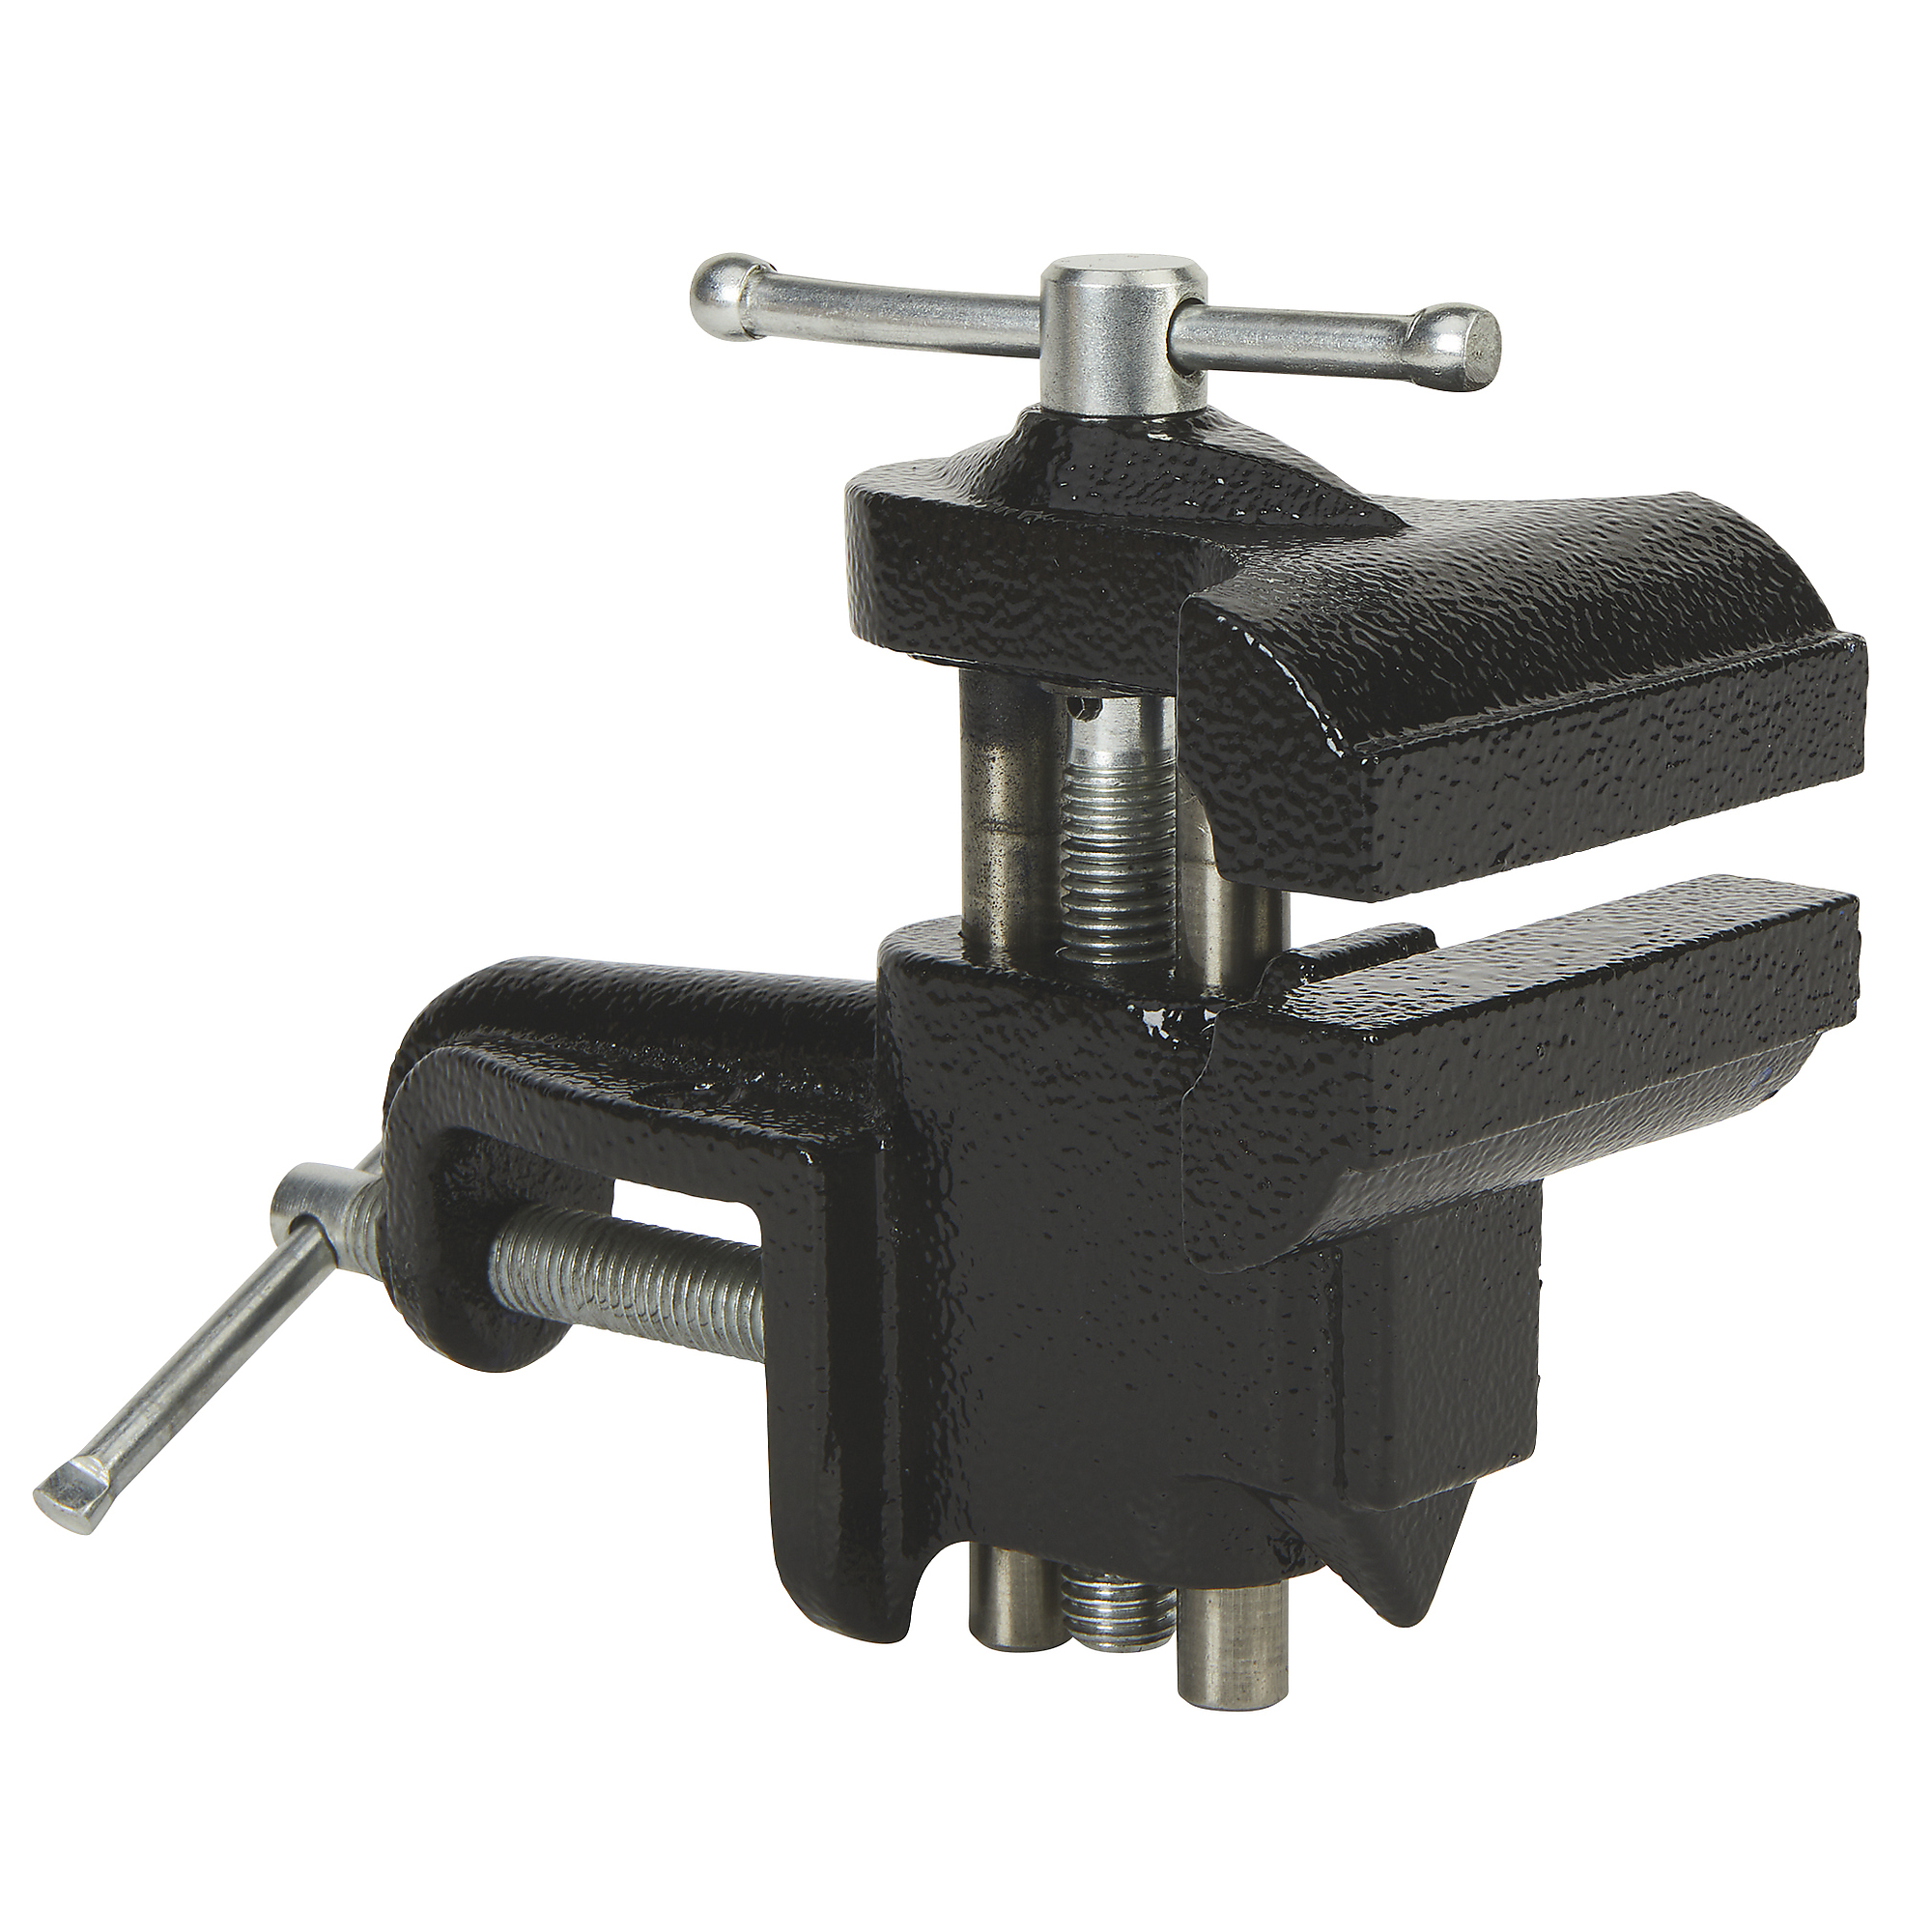 Ironton Clamp-On Bench Vise, 3Inch Jaw Width, 2-1/2Inch Jaw Capacity, Model AT-CV-03